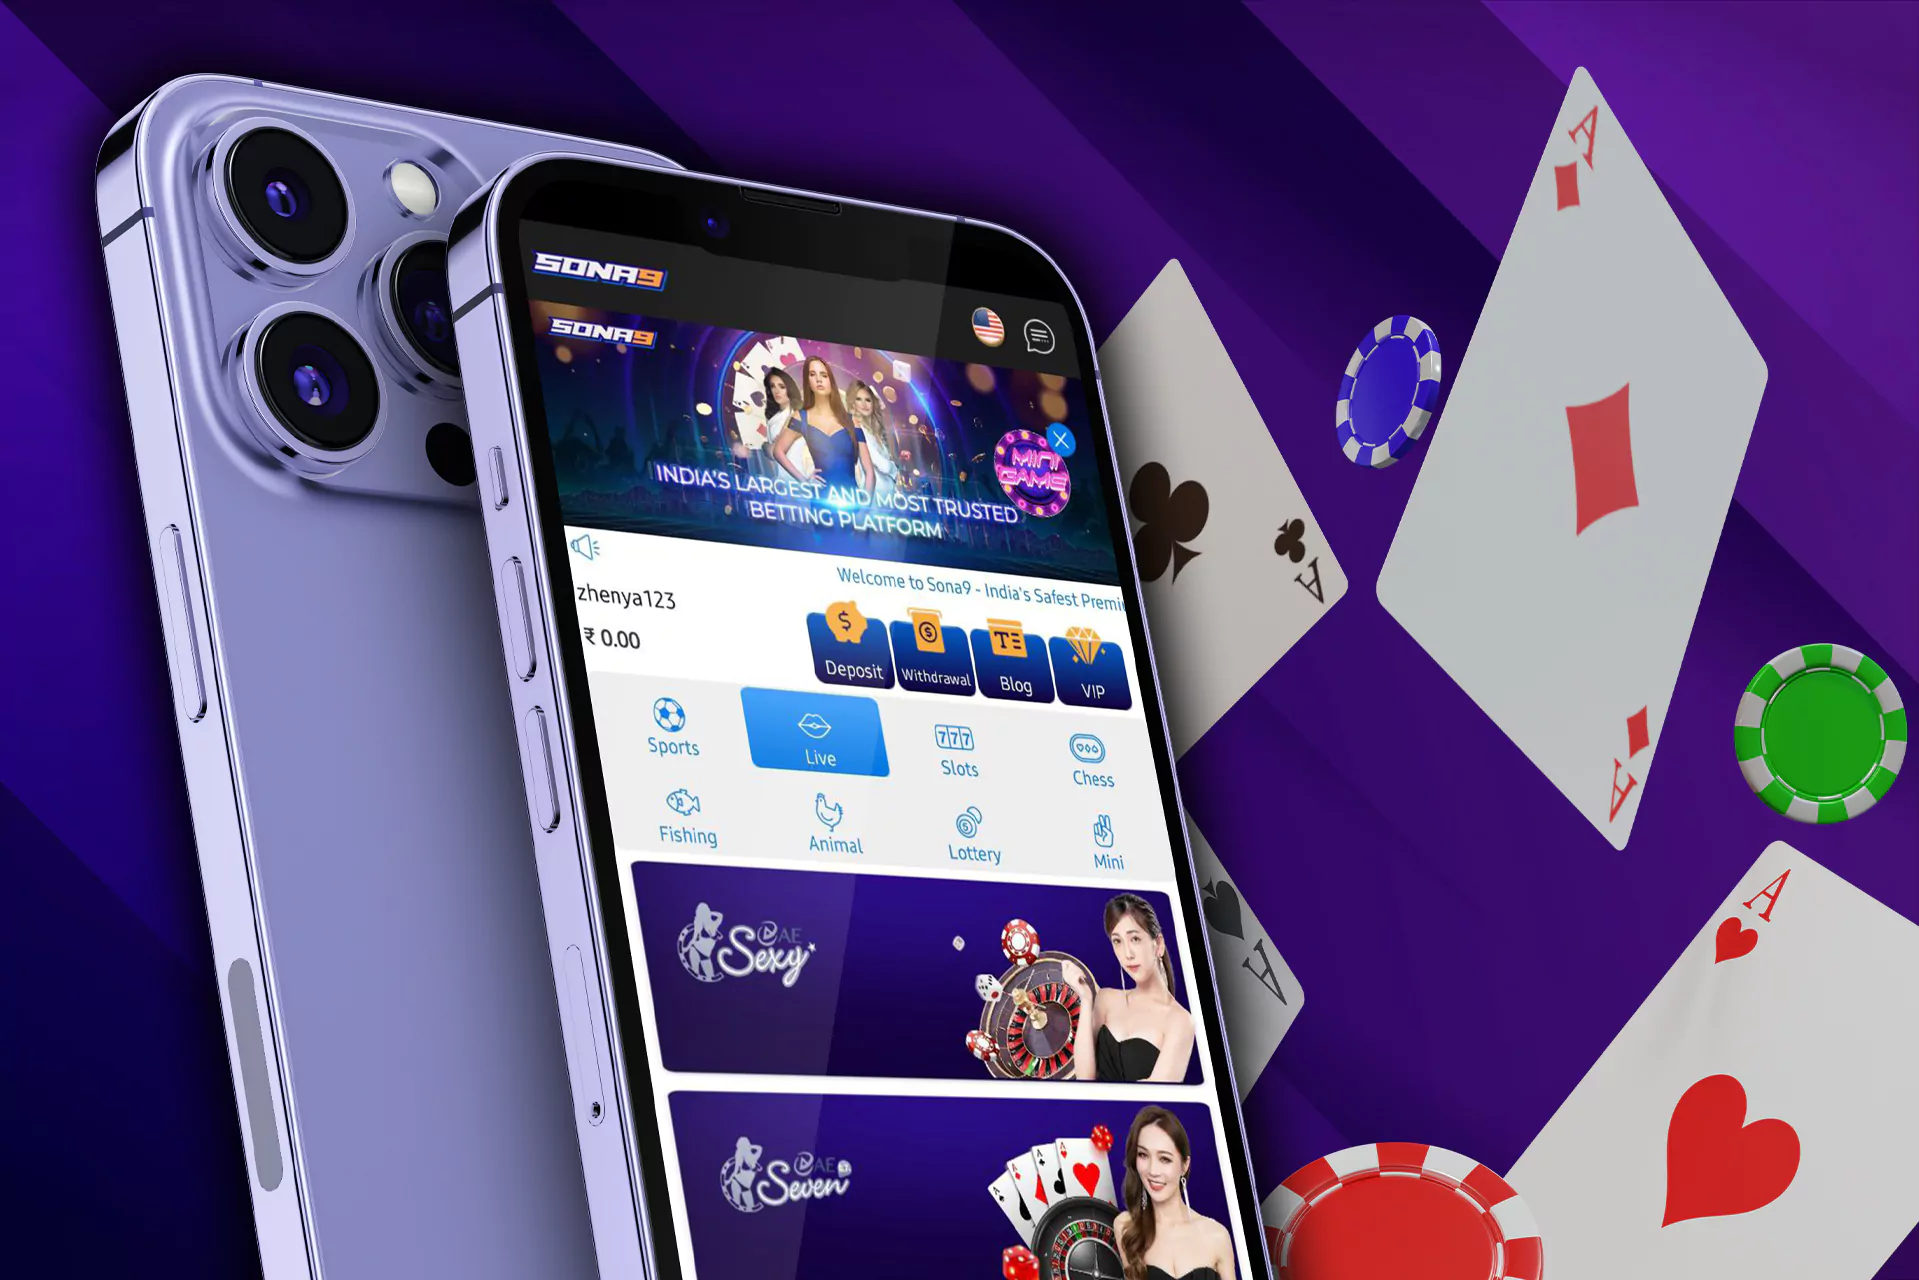 Sona9 app also has the online casino section.